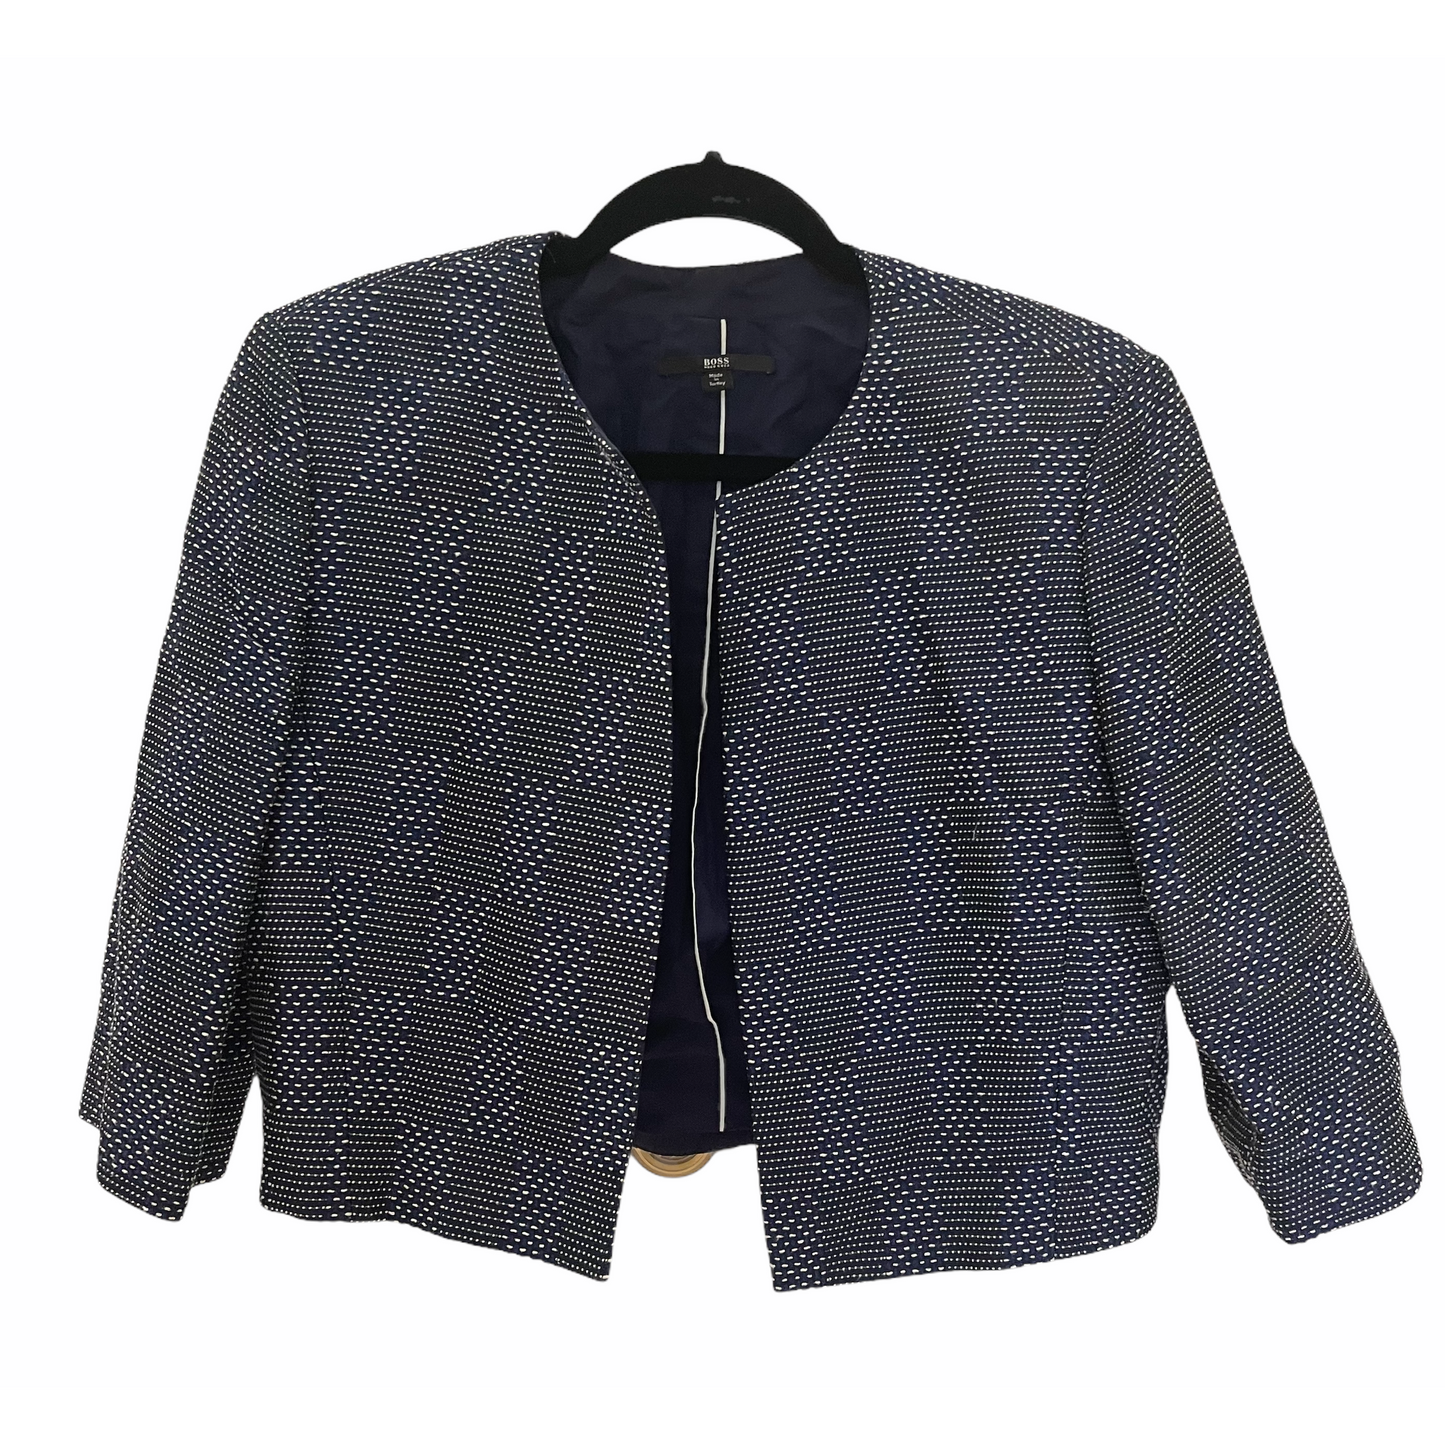 Jacket-Cropped-Navy Blue Coloring-By Hugo Boss